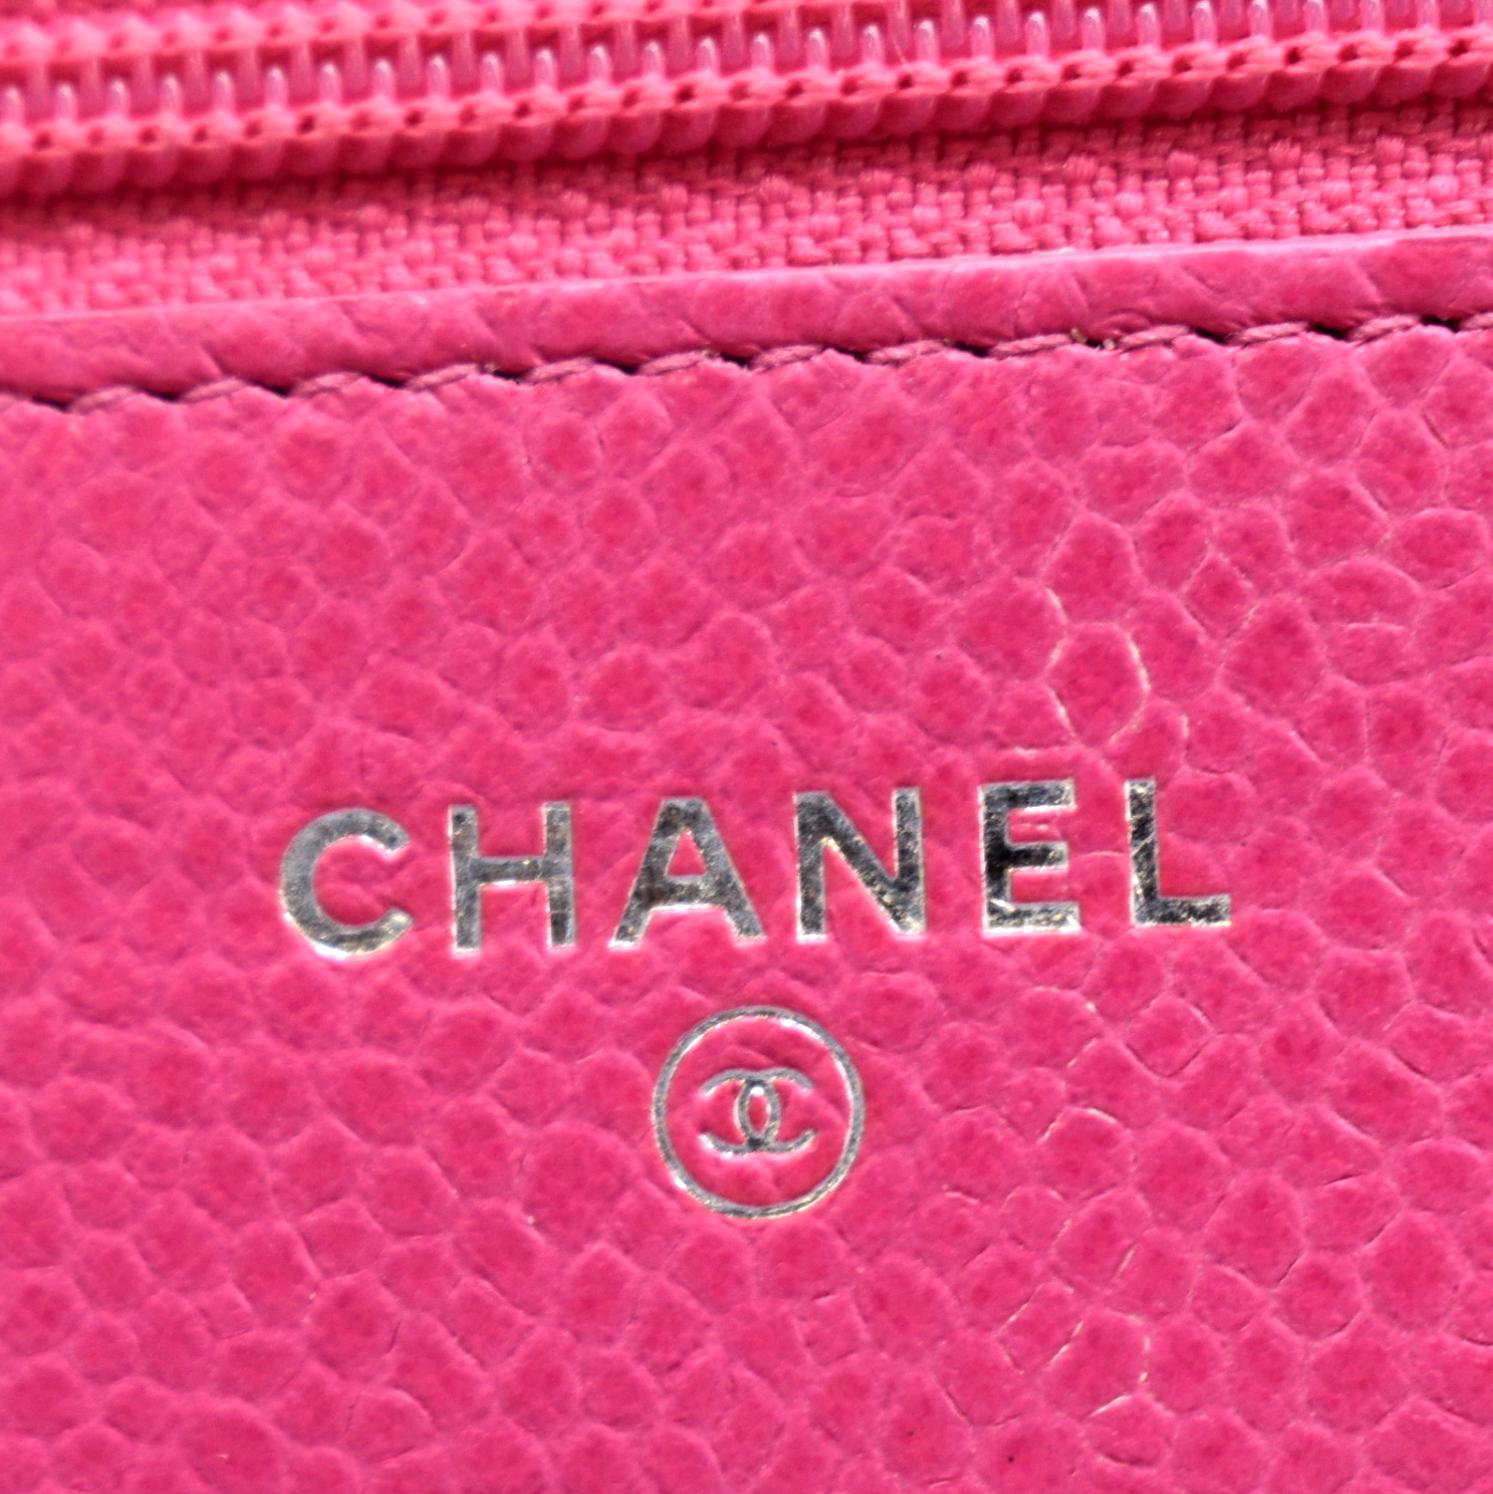 Wallet on chain leather handbag Chanel Pink in Leather - 33283055